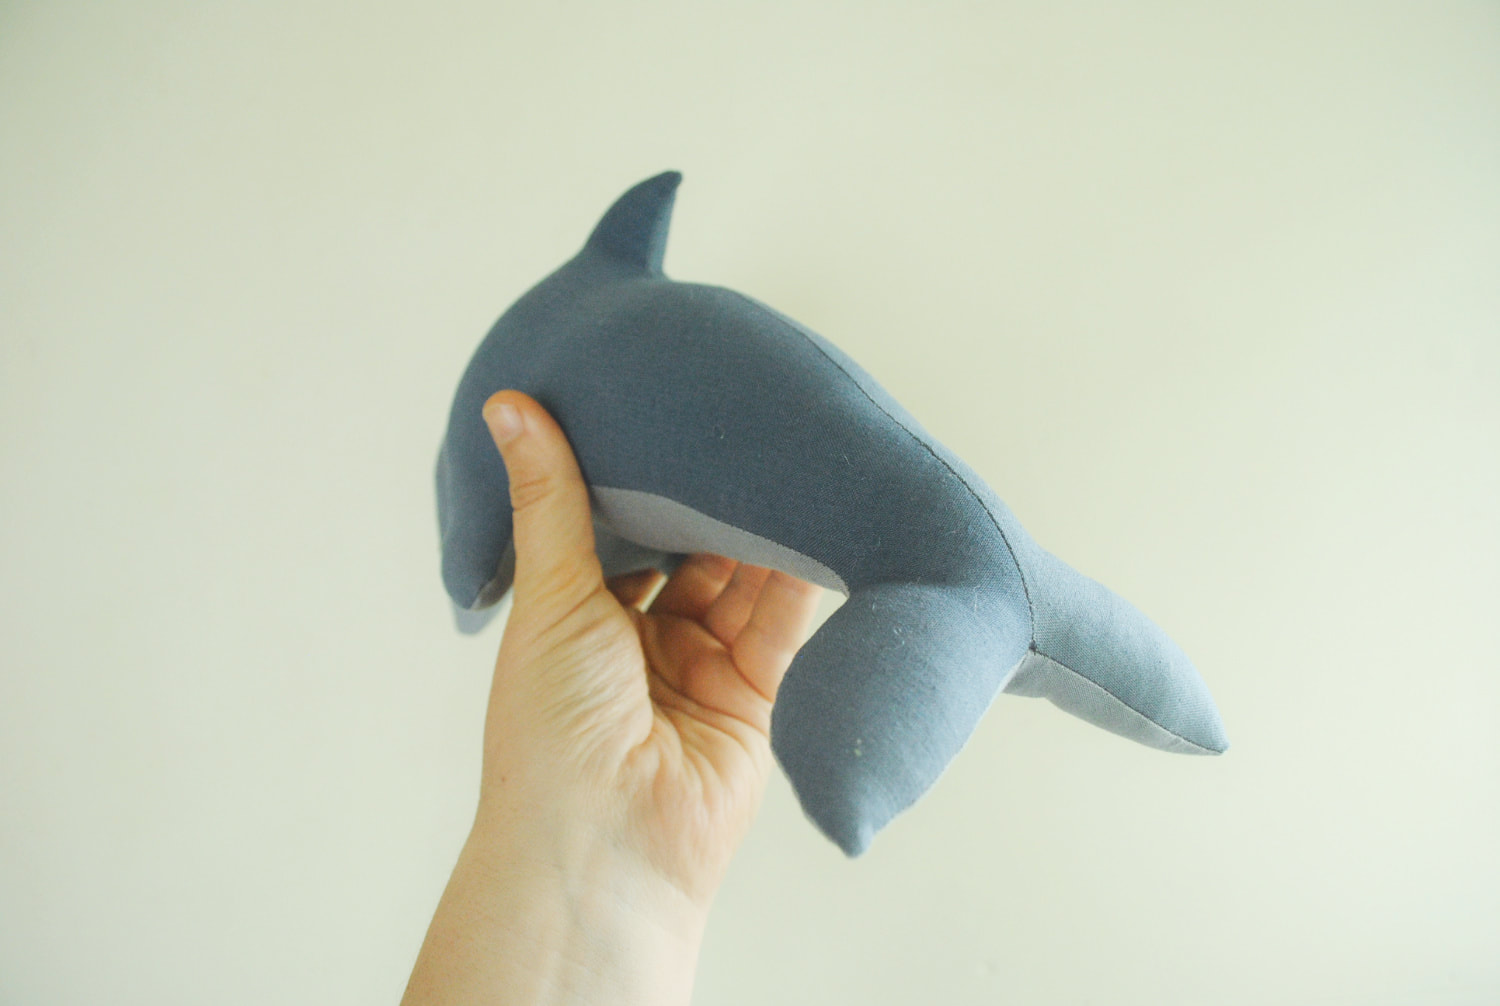 Dolphin Soft Toy Pdf Sewing Patterns